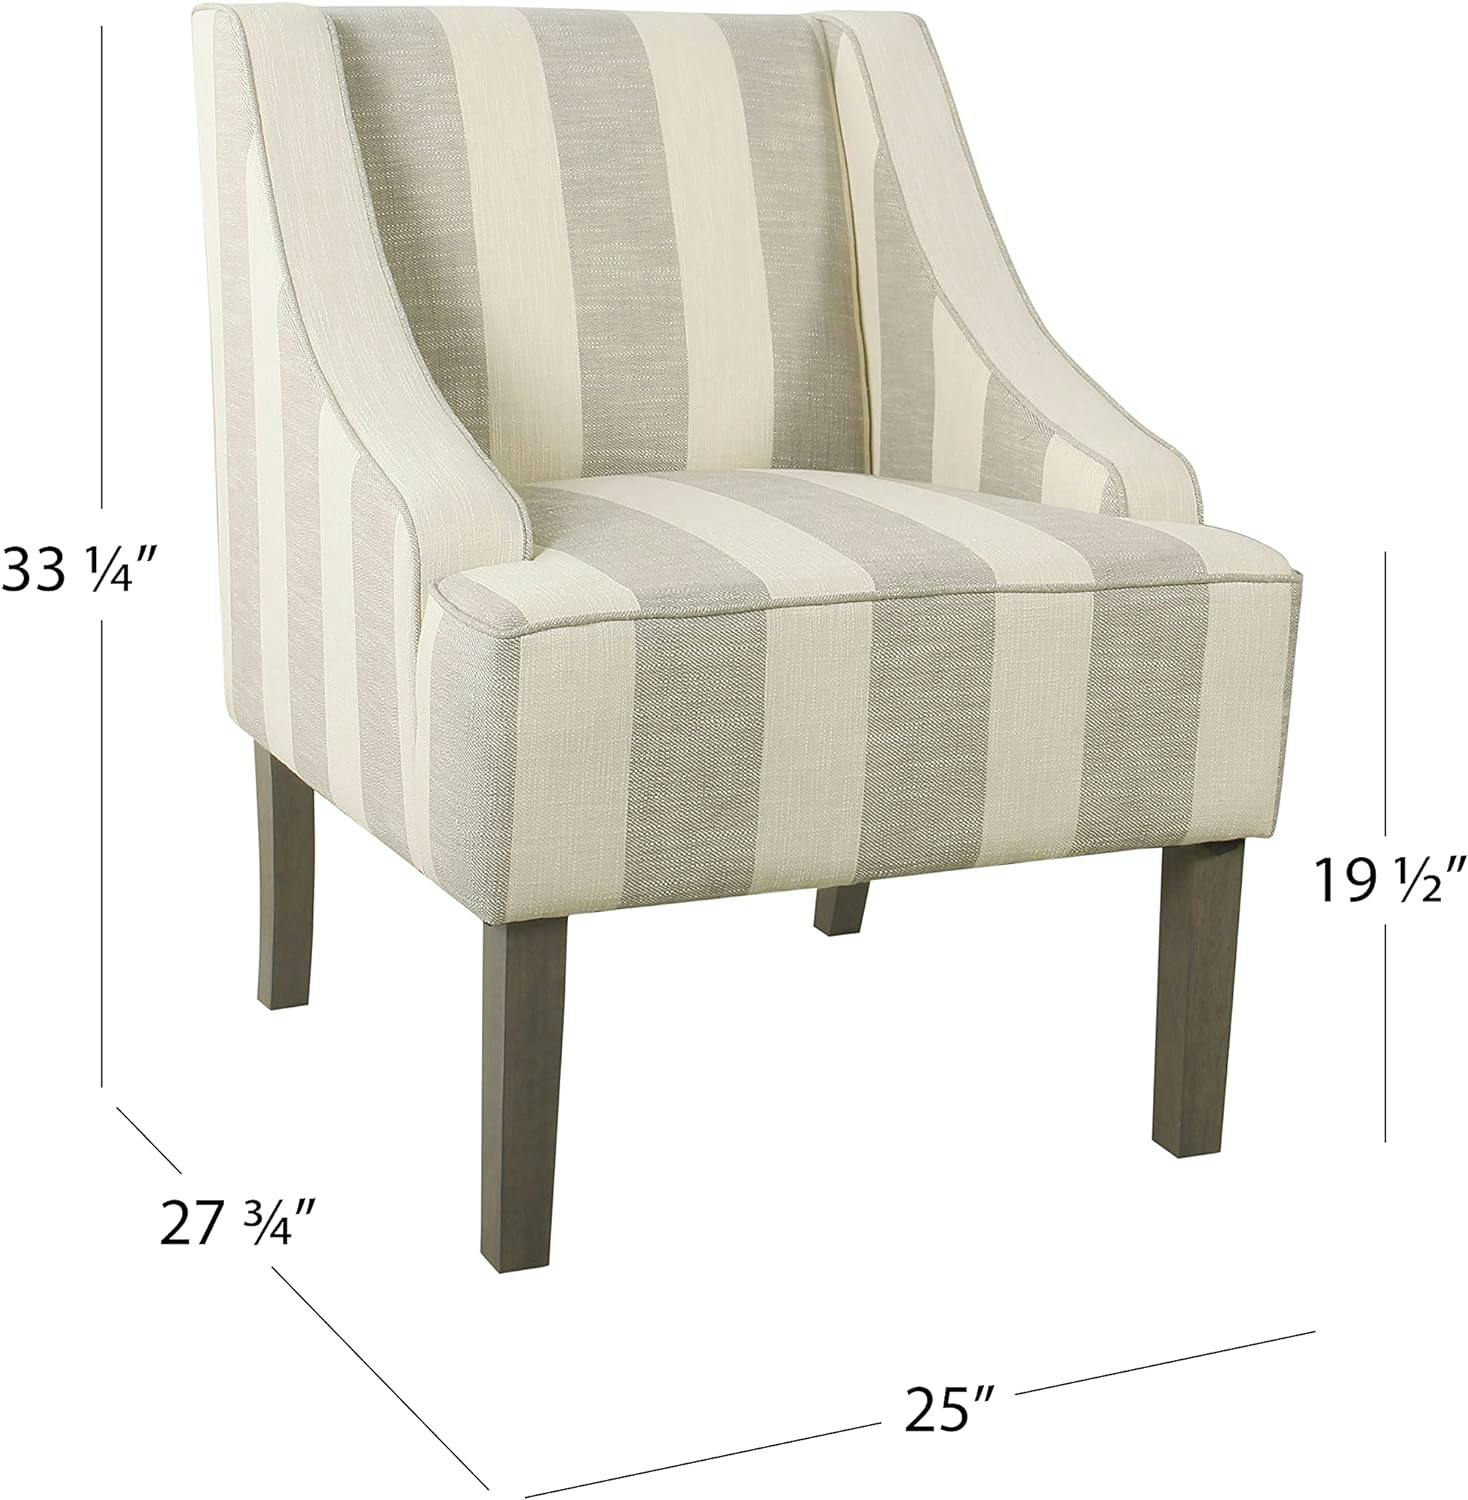 Classic Gray Stripe Swoop Armchair with Wood Legs